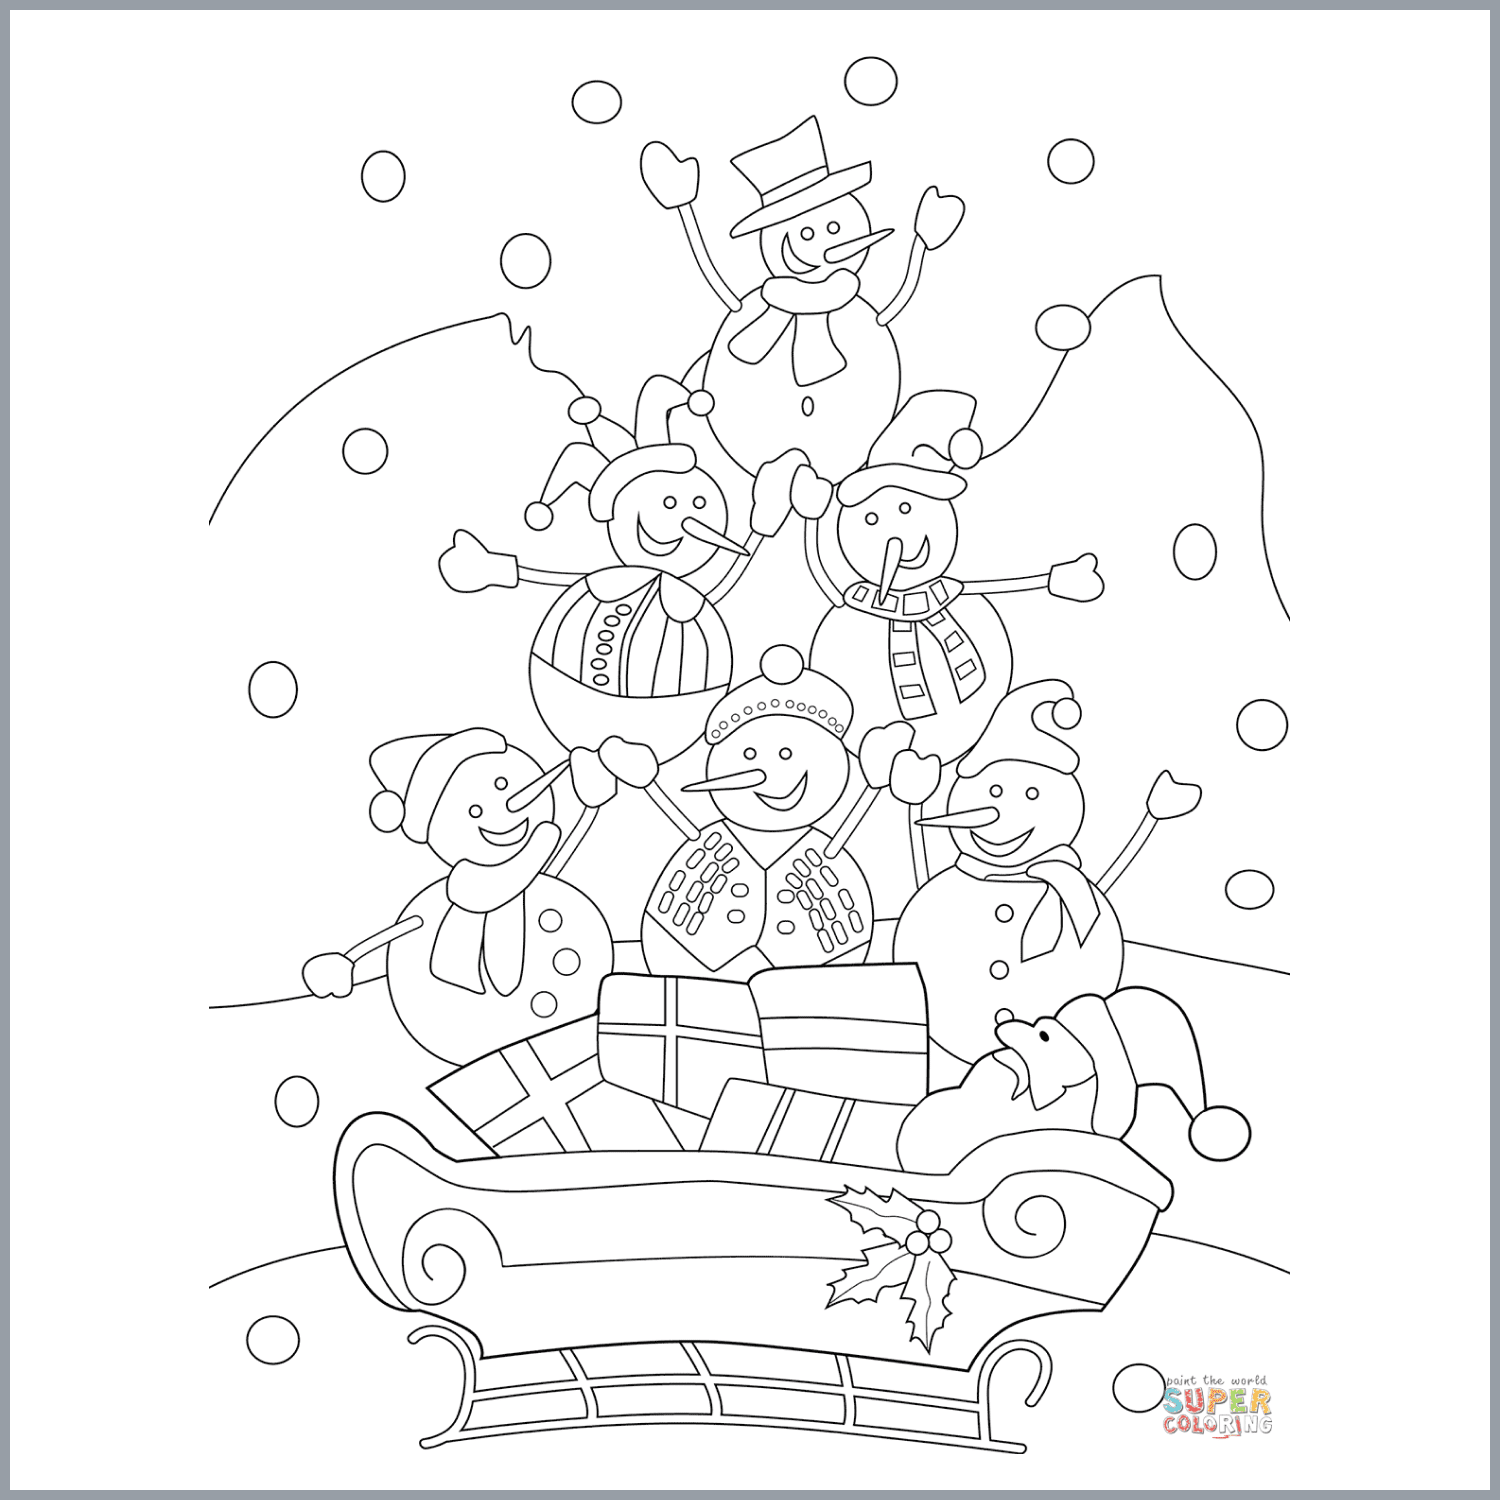 Snowmen with Santa on a Sled coloring page cover image.